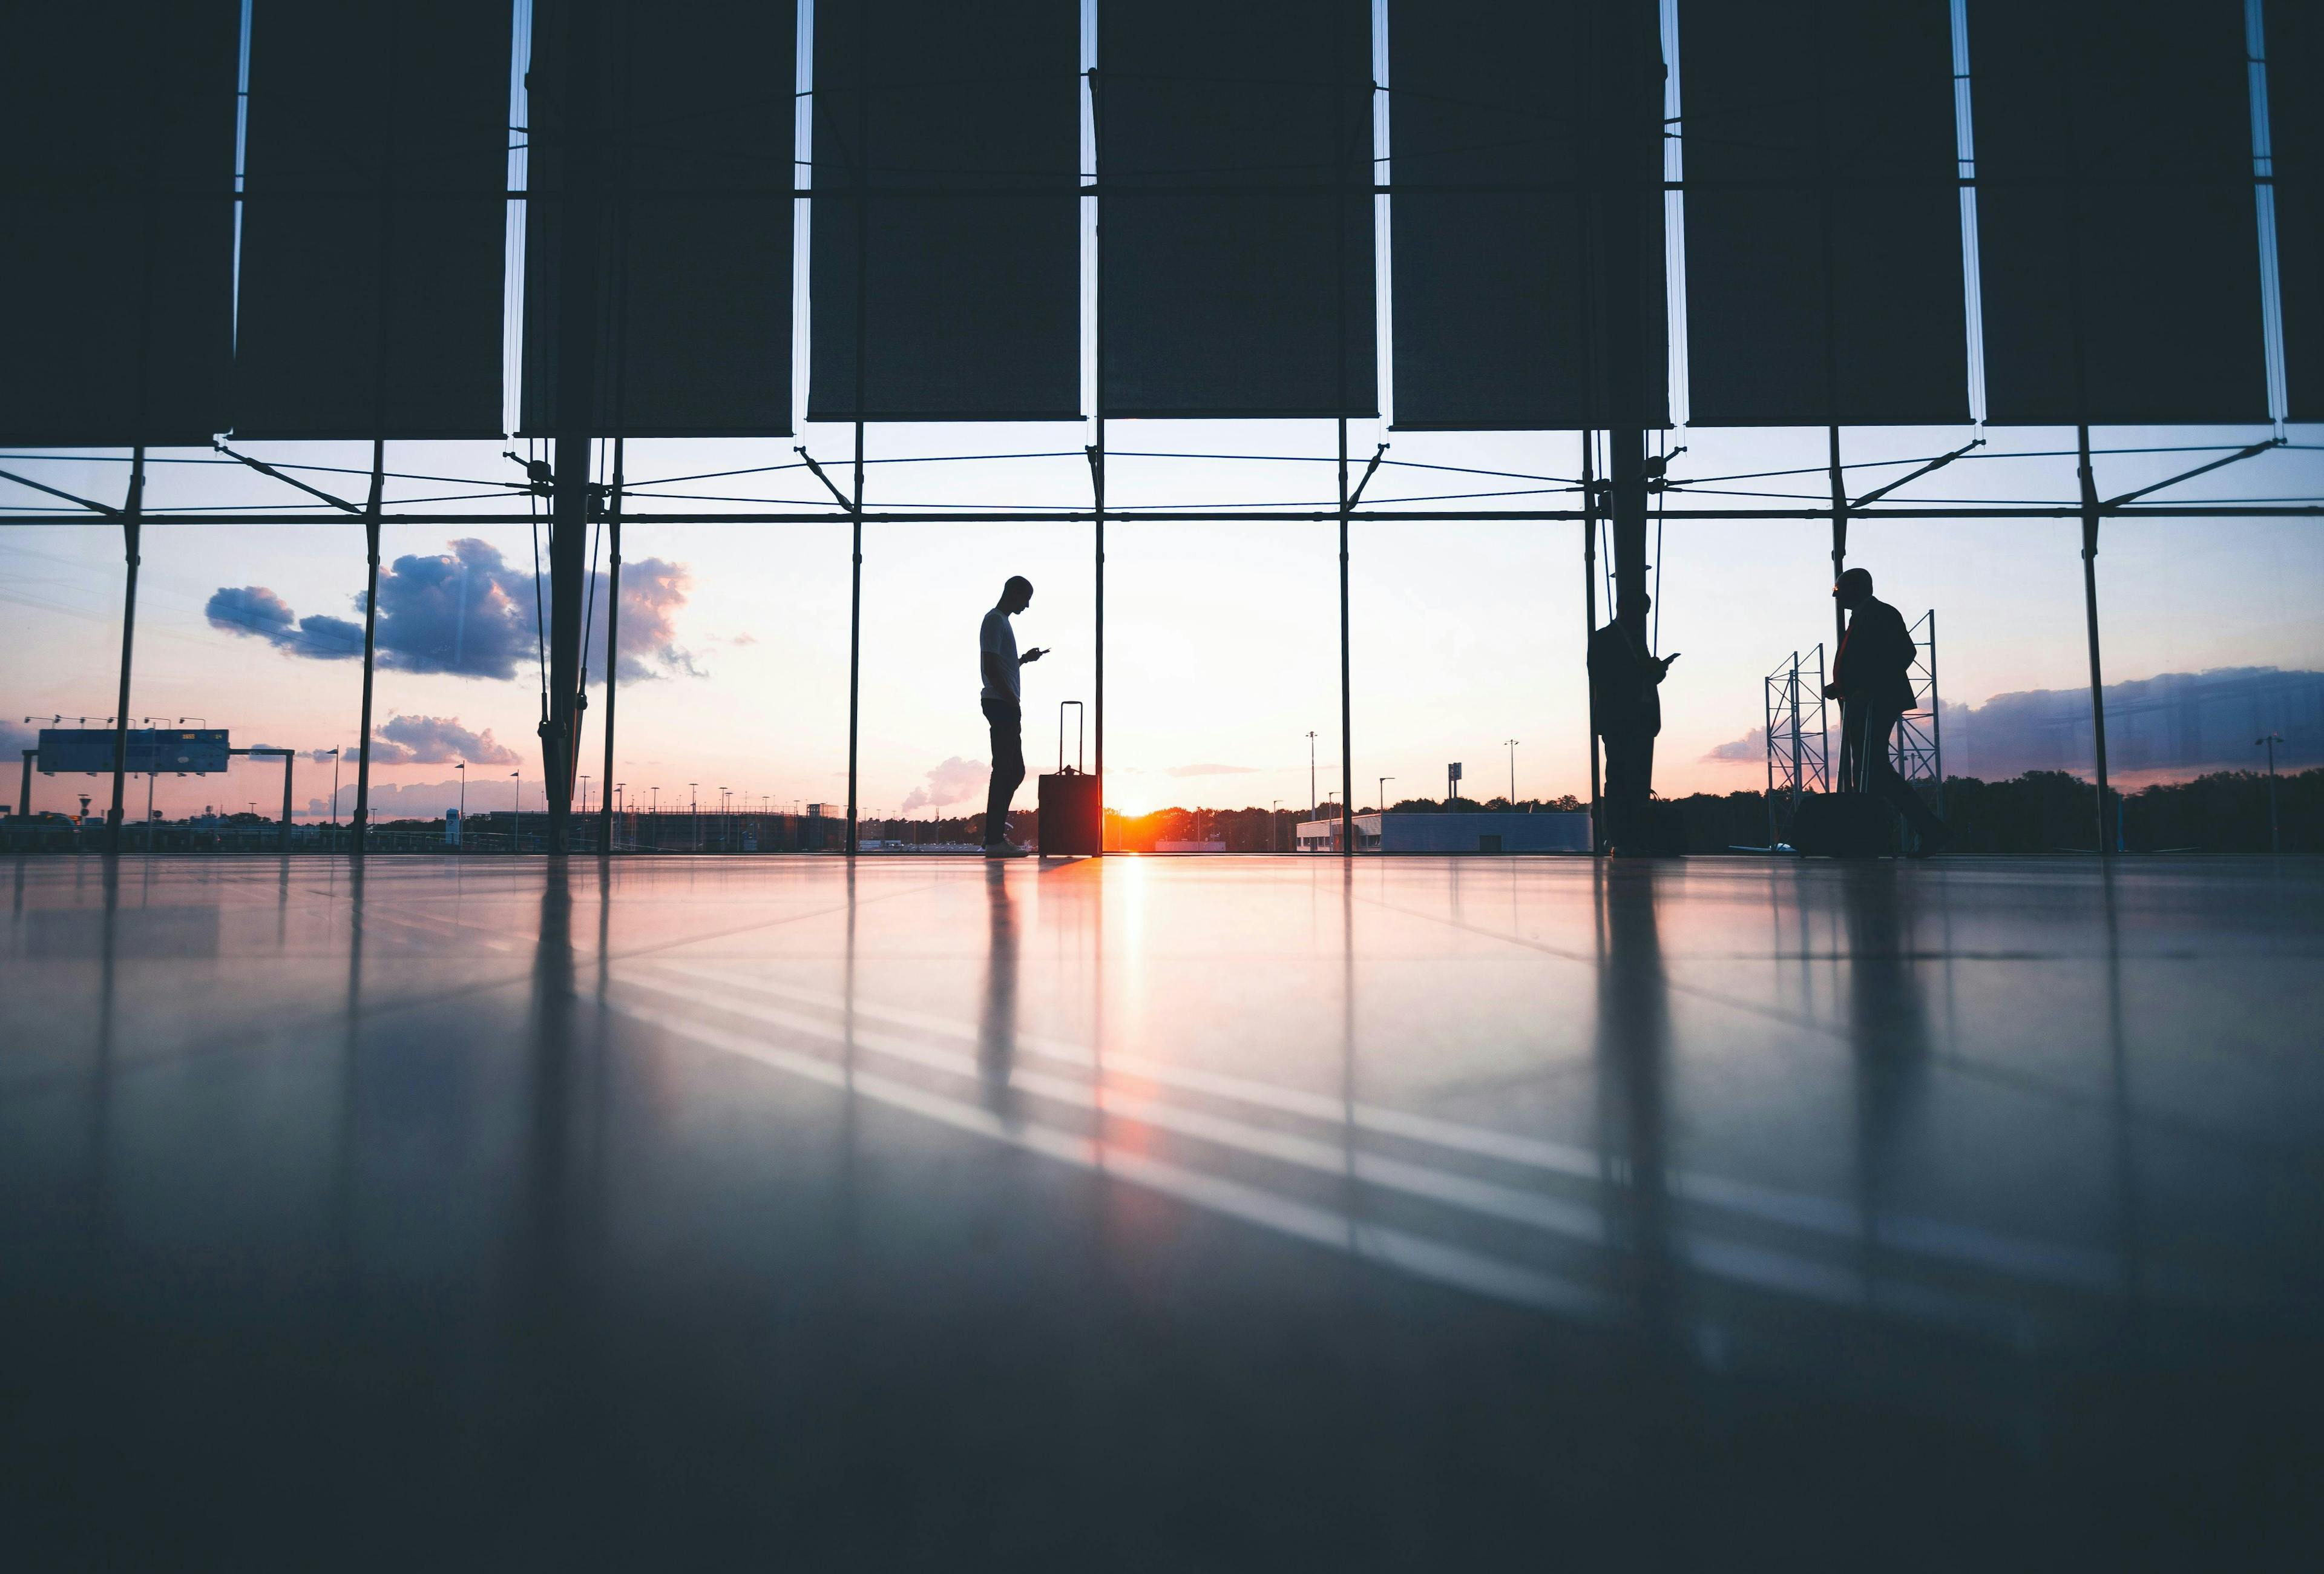 Silhouetted individuals stand and interact with their devices near large windows at an airport terminal during a scenic sunset with scattered clouds.